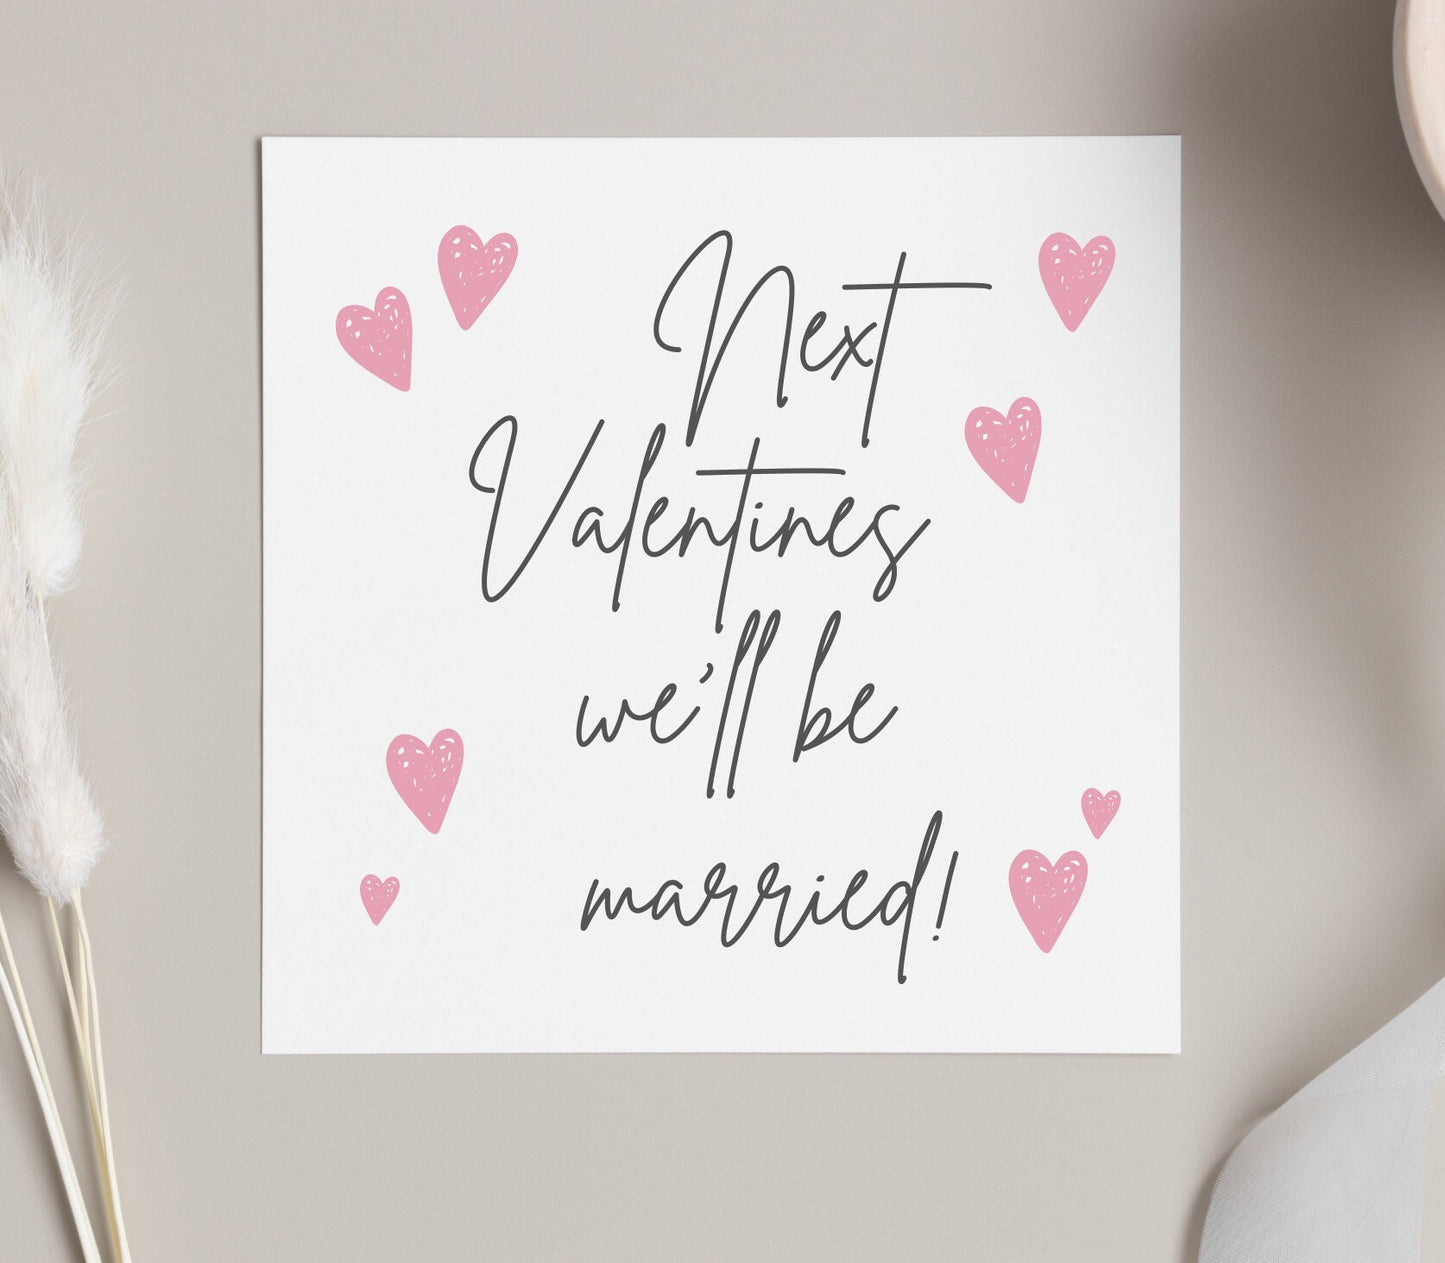 Next Valentine’s Day we will be married card, engaged couple valentines cards, card for my fiancé on valentines